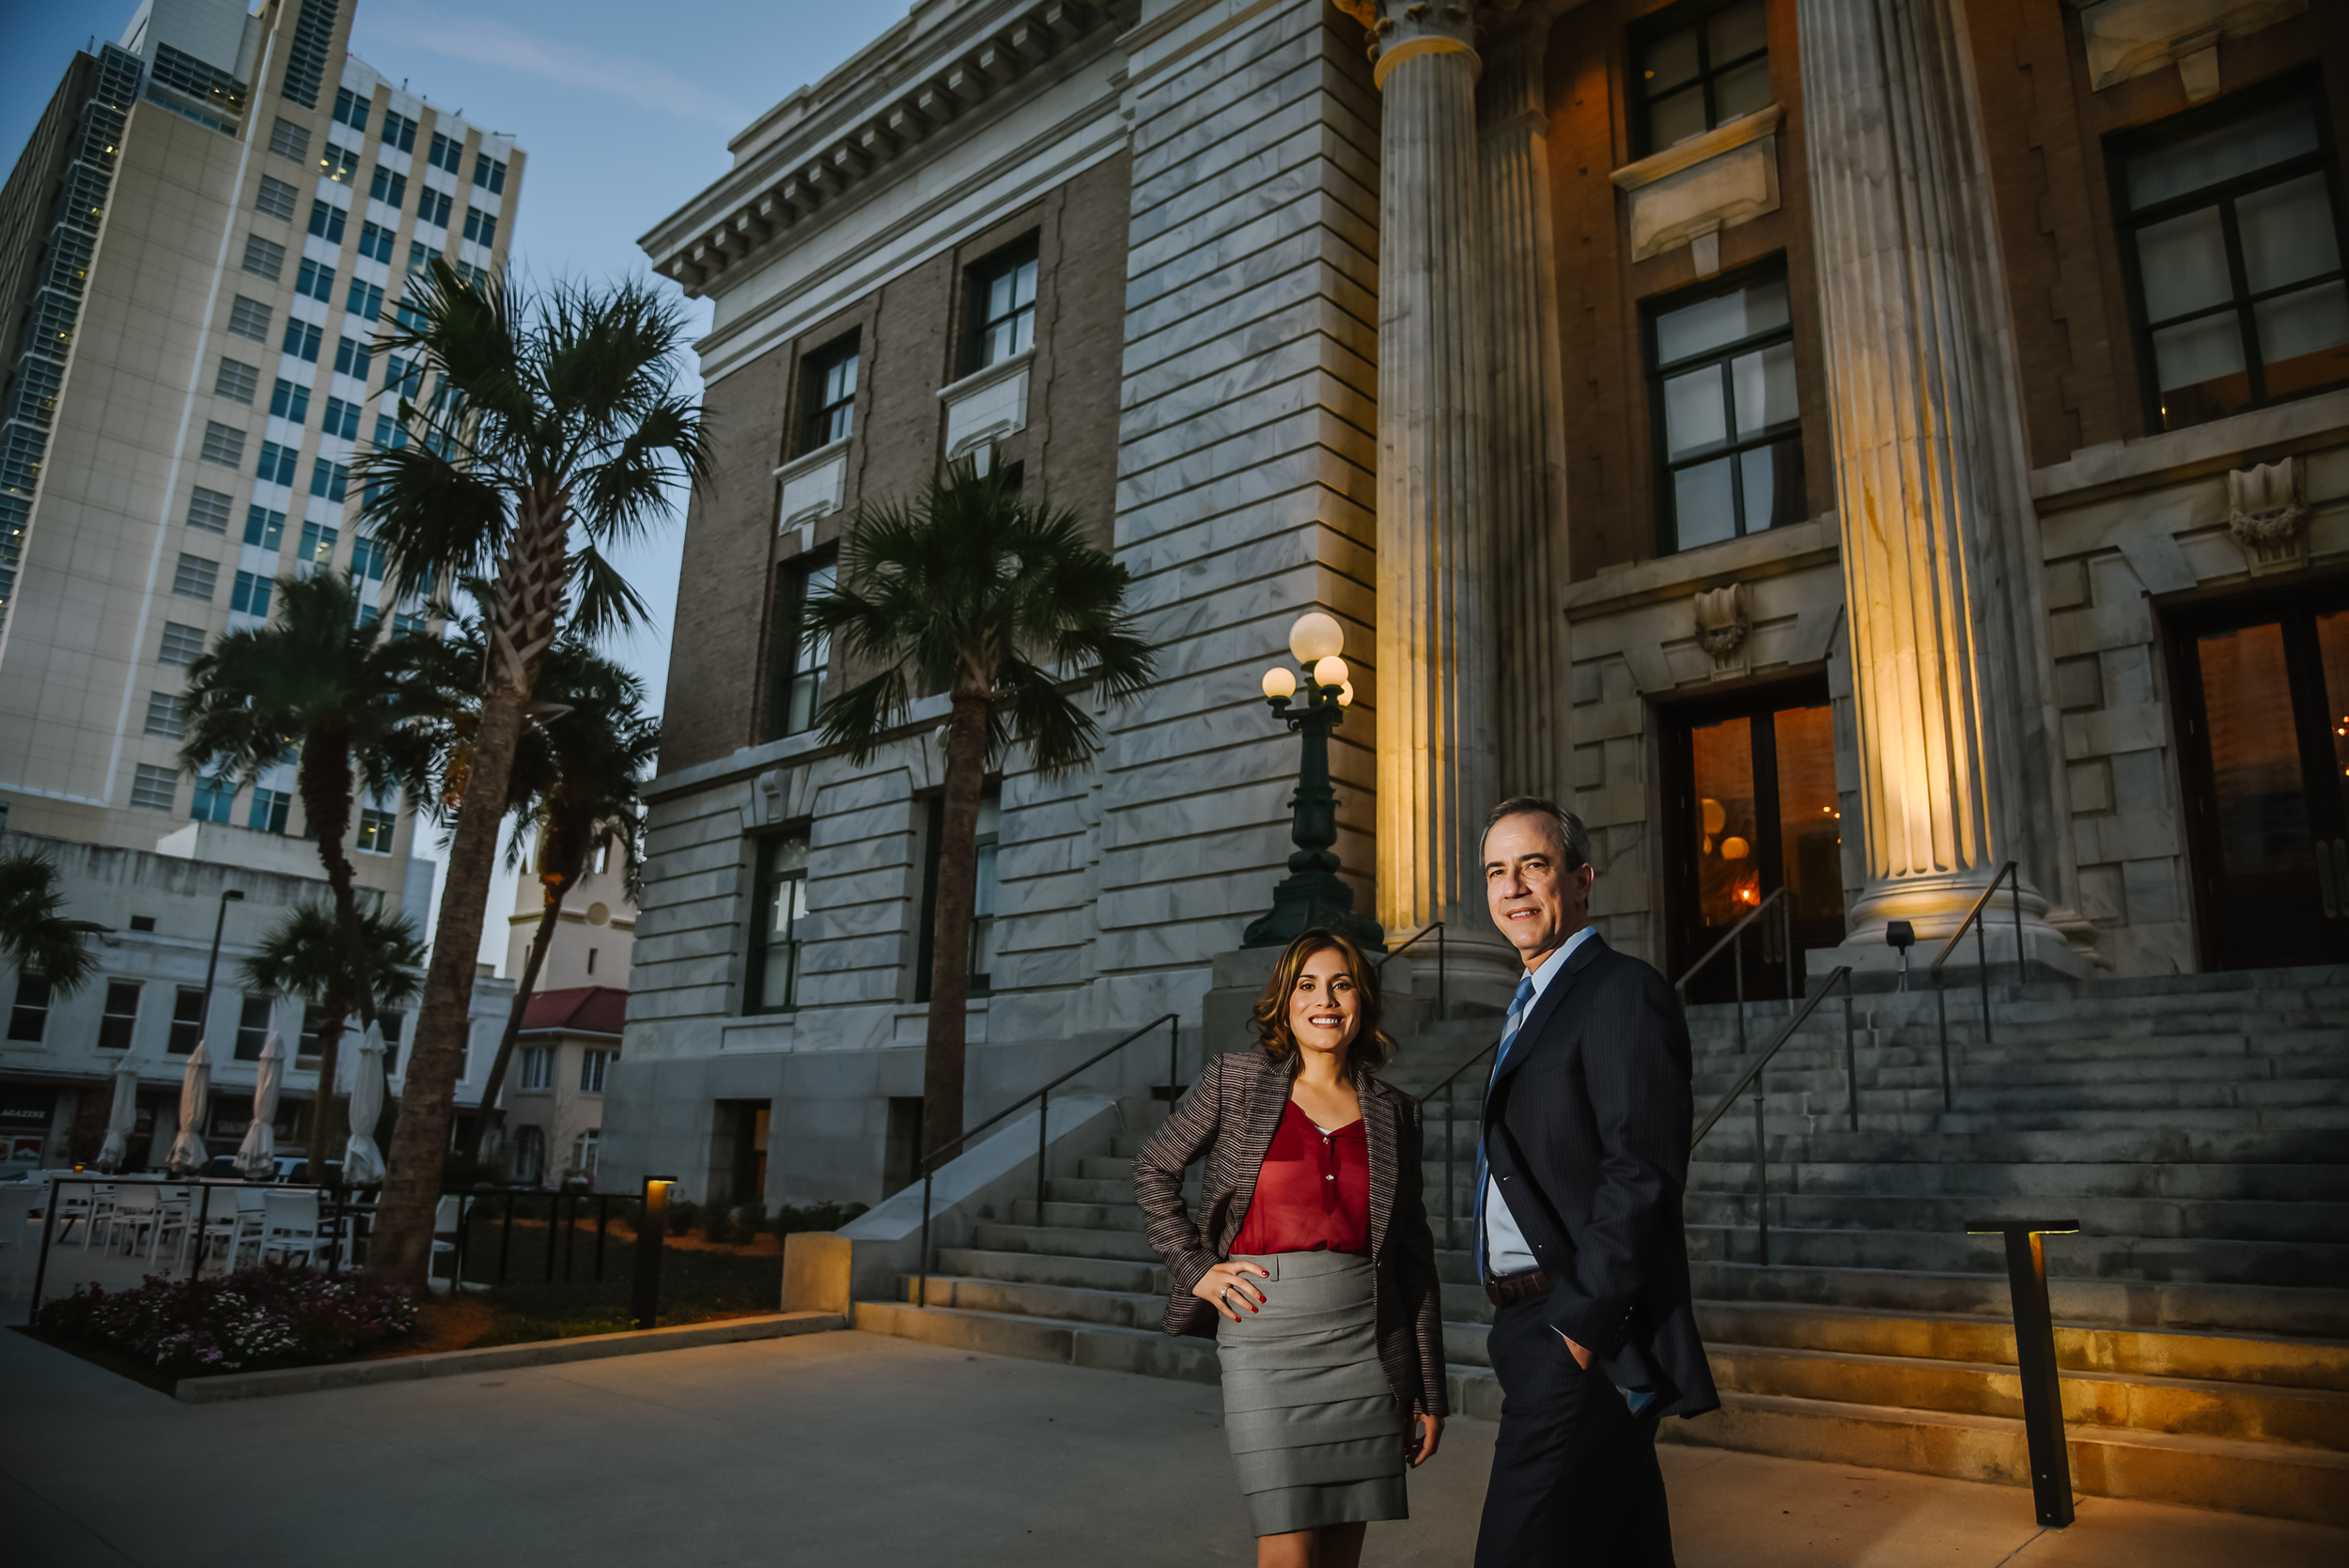 Next the Fiol Law partners were in need of new portraits. We shot head shots in the studio then ended with some epic frames in front of the old courthouse in downtown Tampa at twilight.&nbsp;